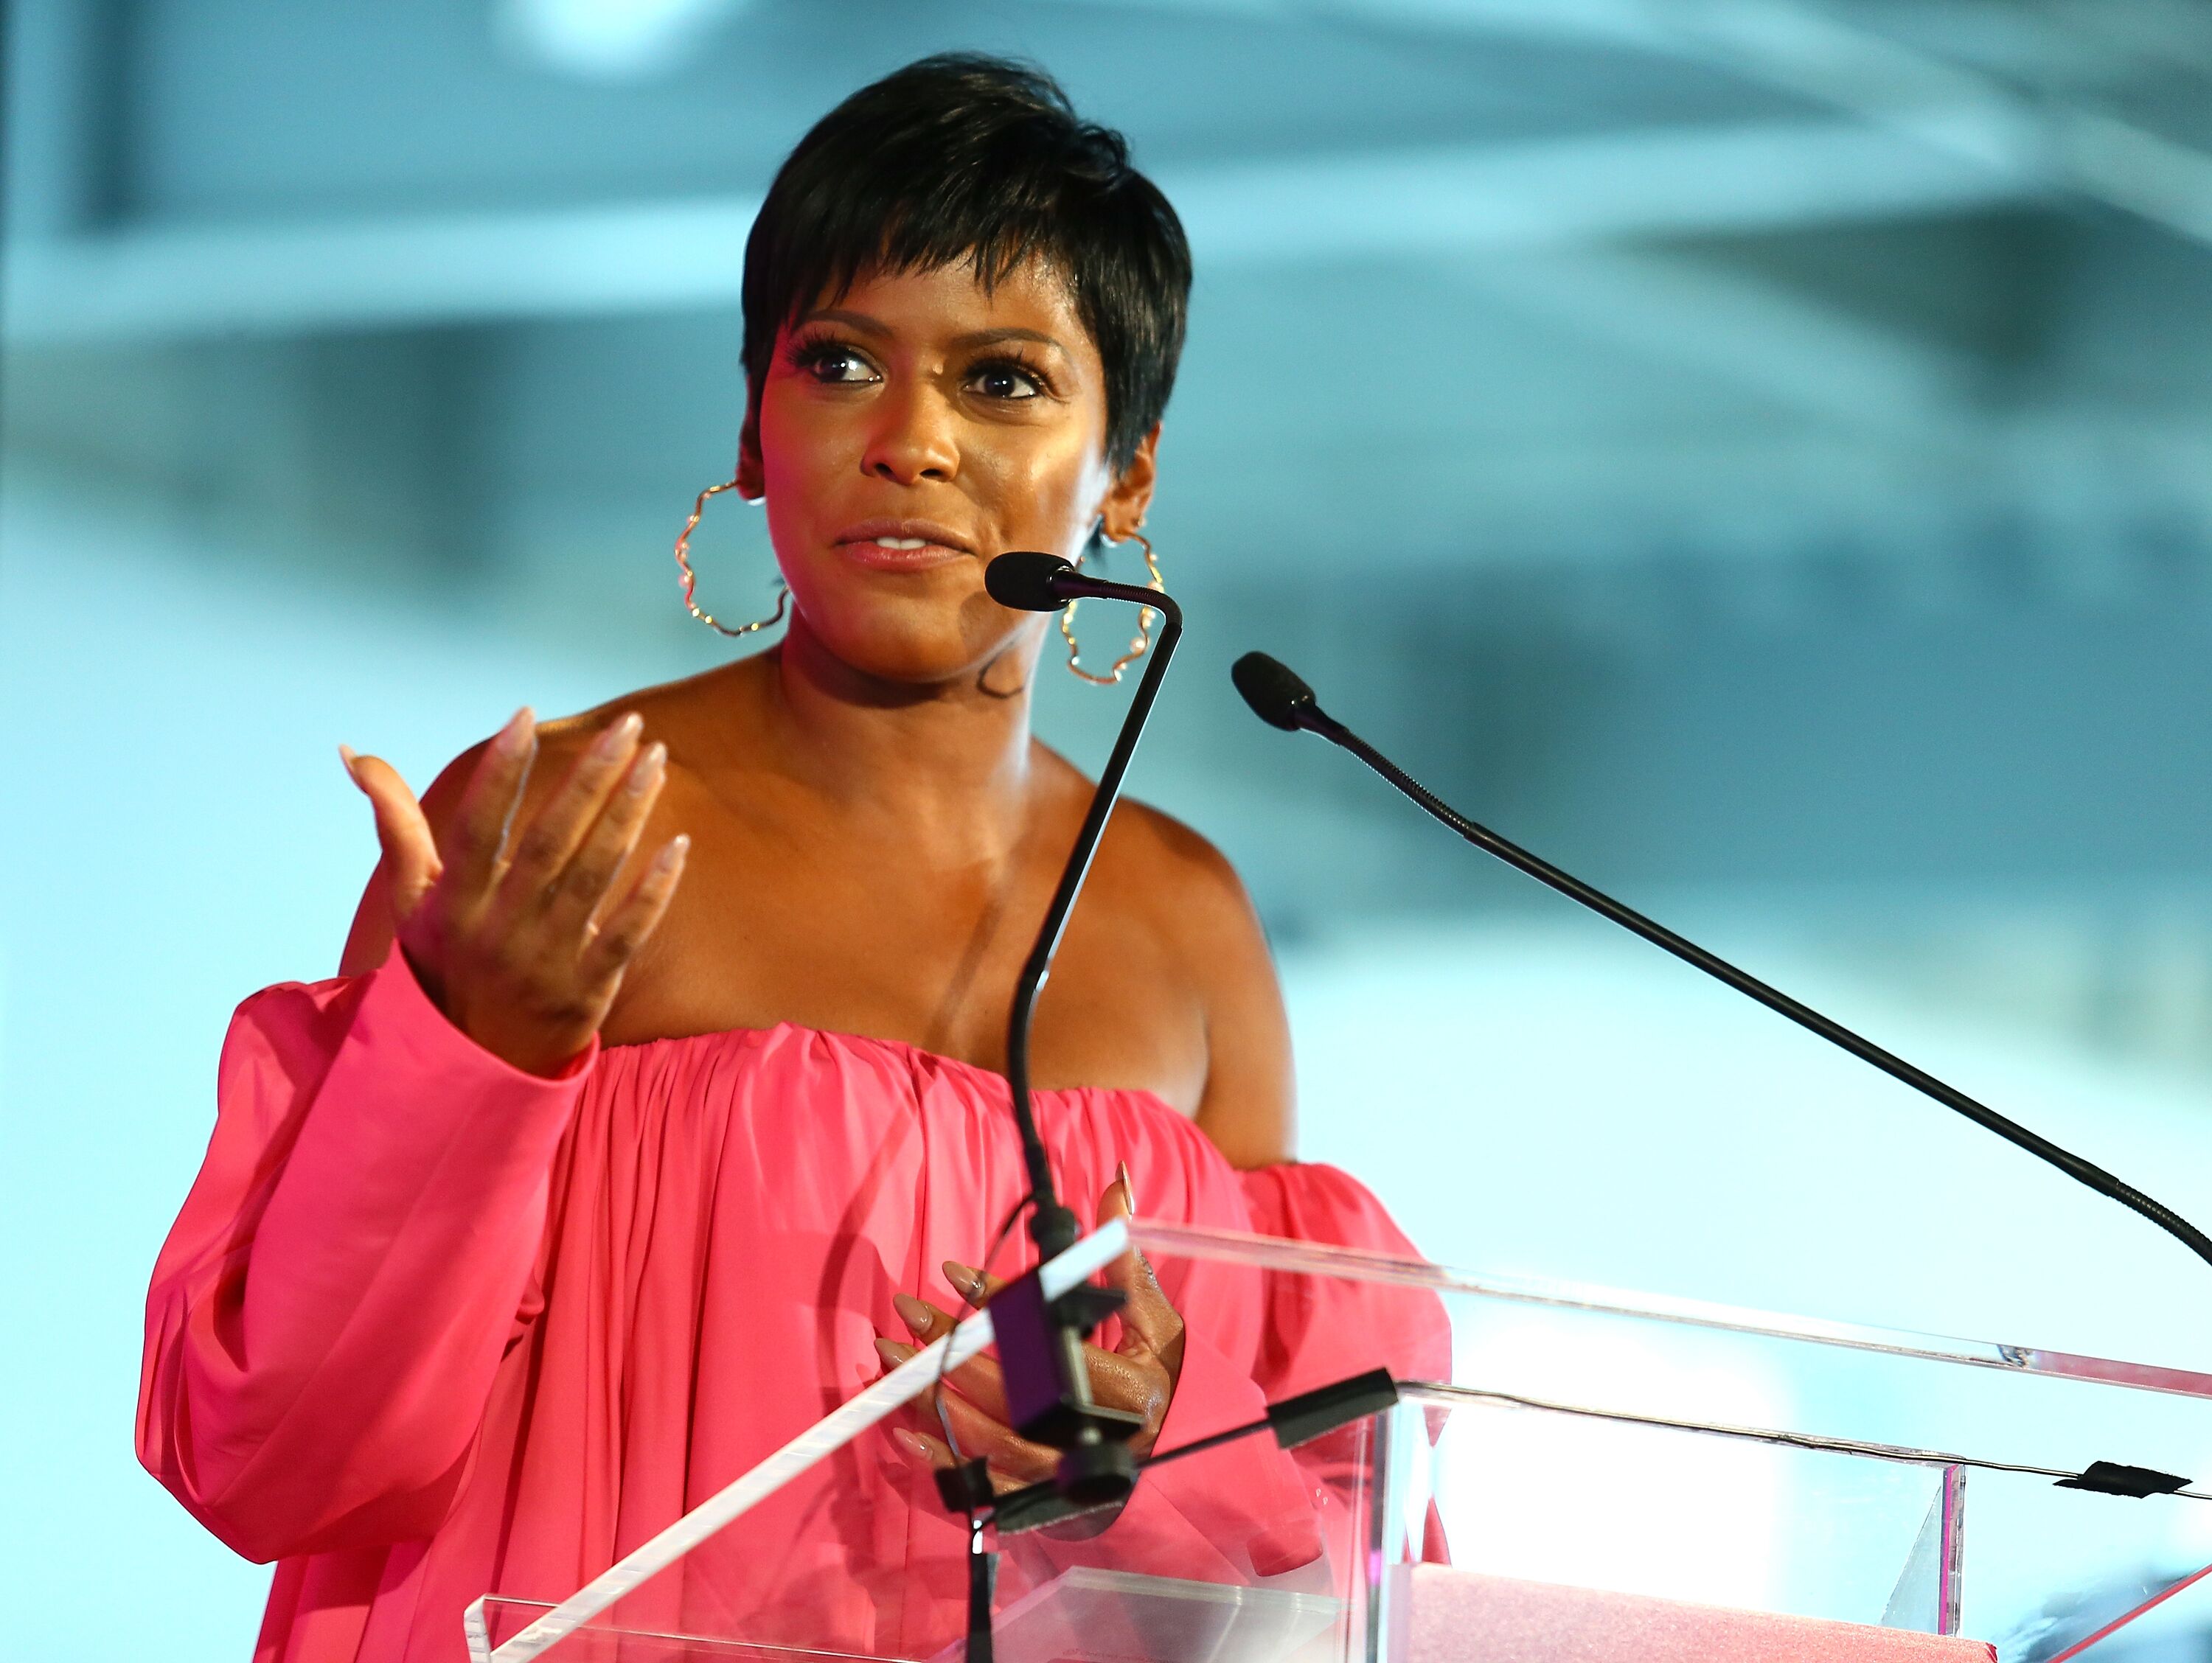 Tamron Hall speaking at a conference | Source: Getty Images/GlobalImagesUkraine